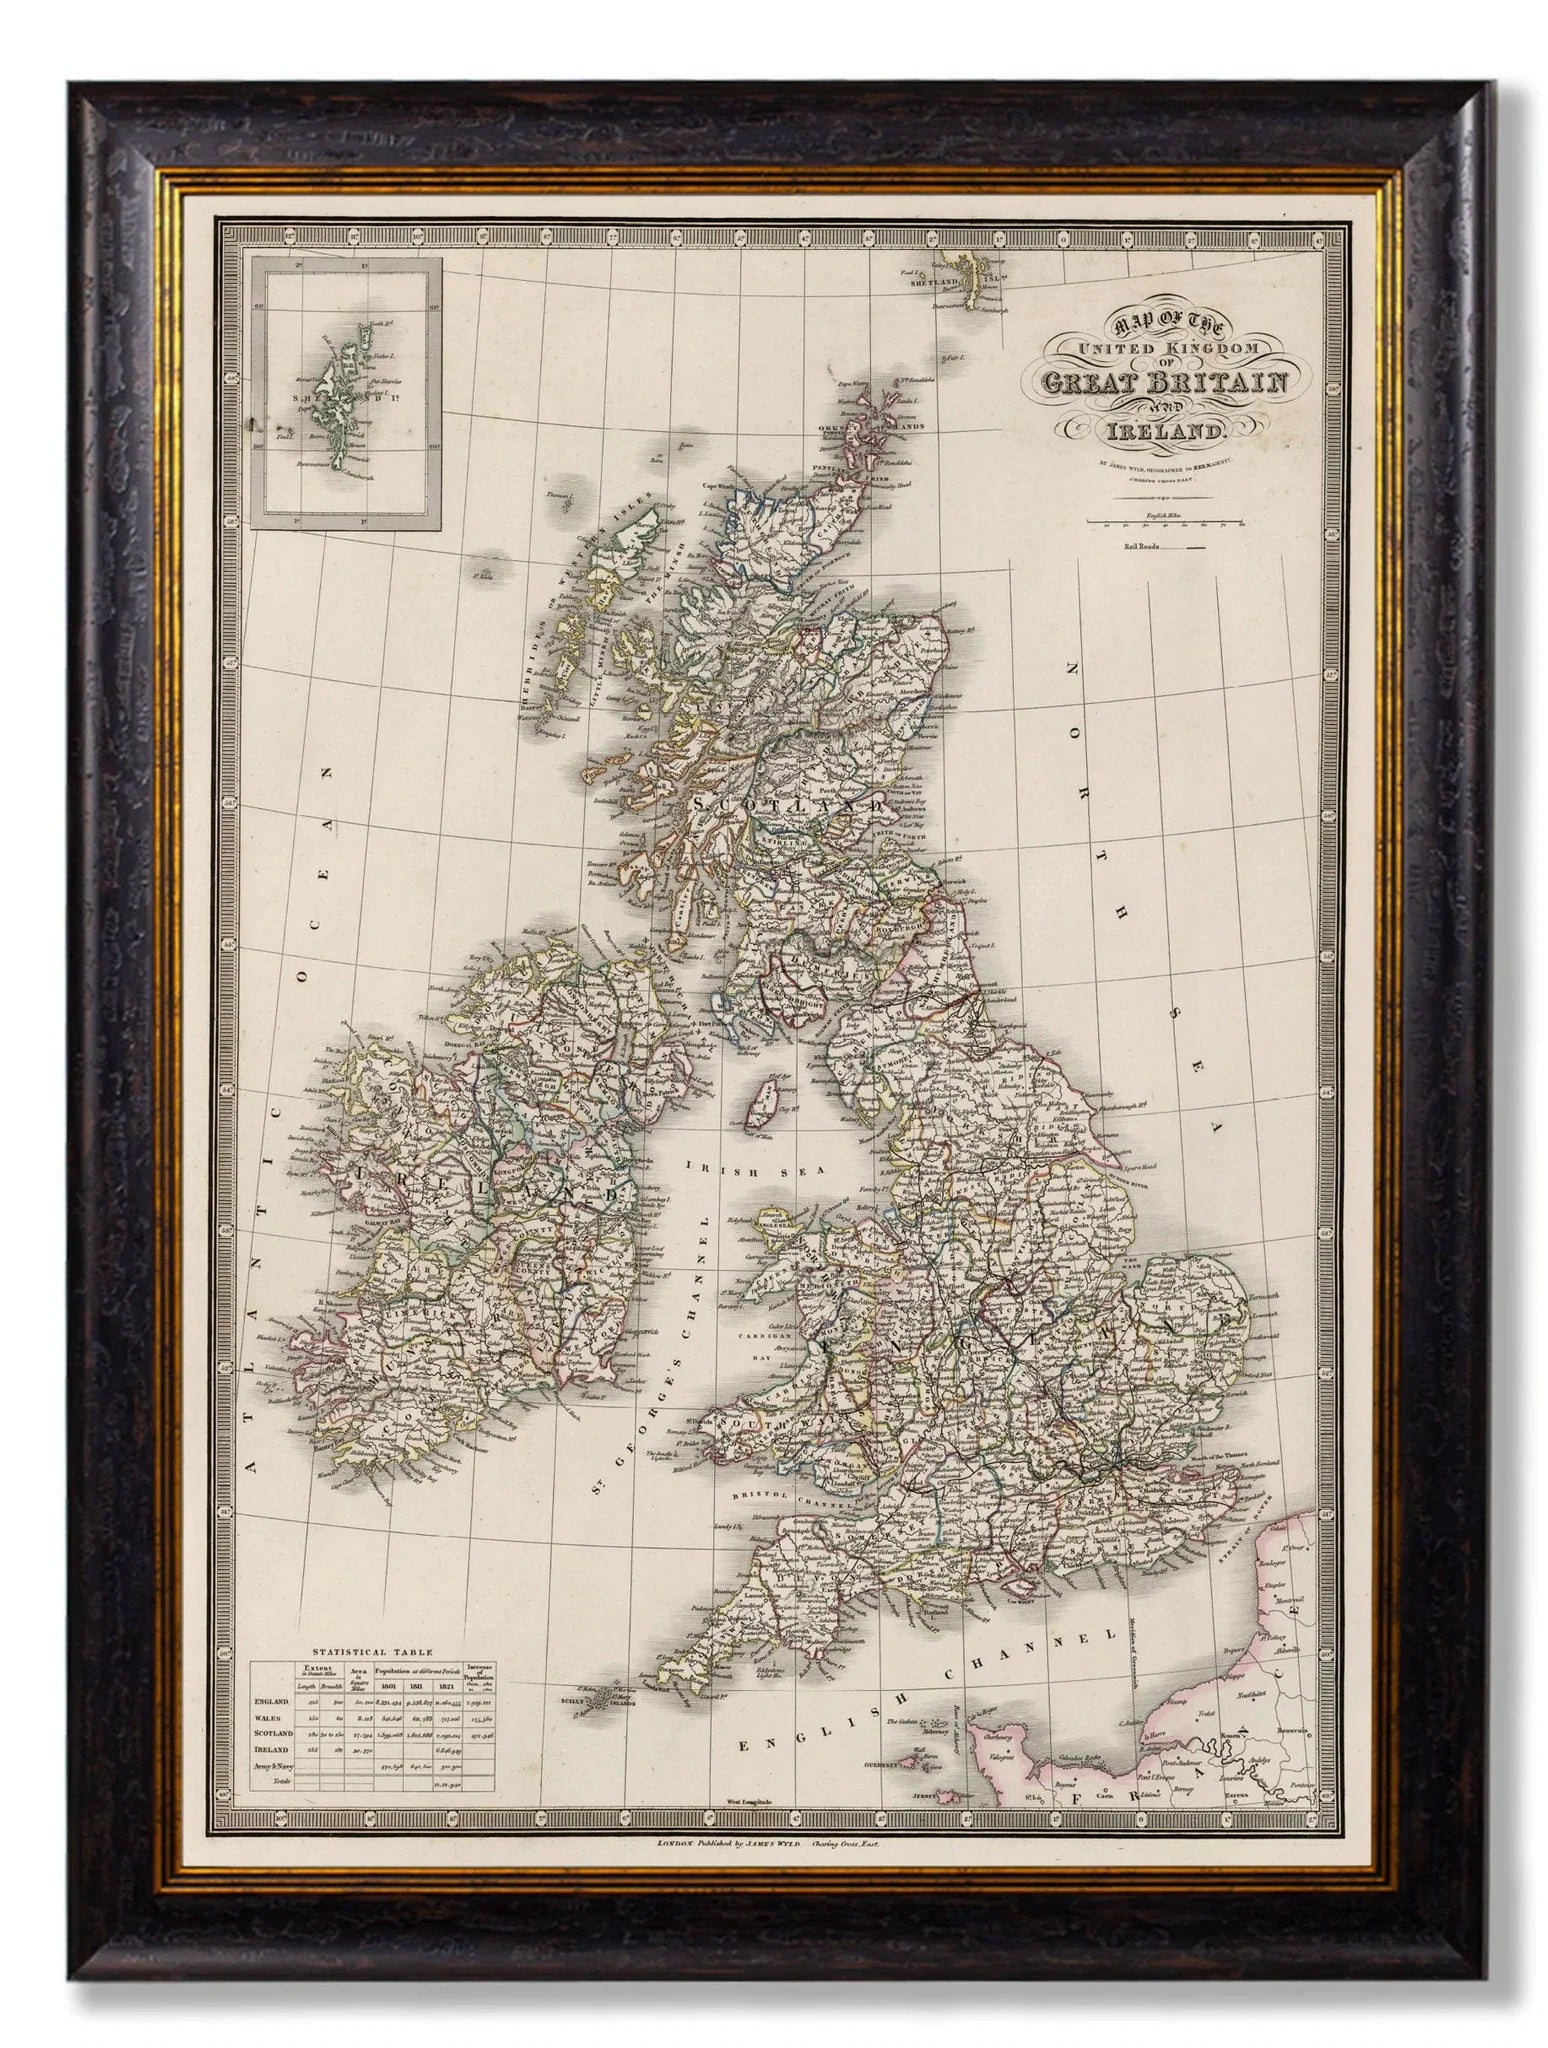 C.1838 Map Of The British Isles Frame for sale - Woodcock and Cavendish